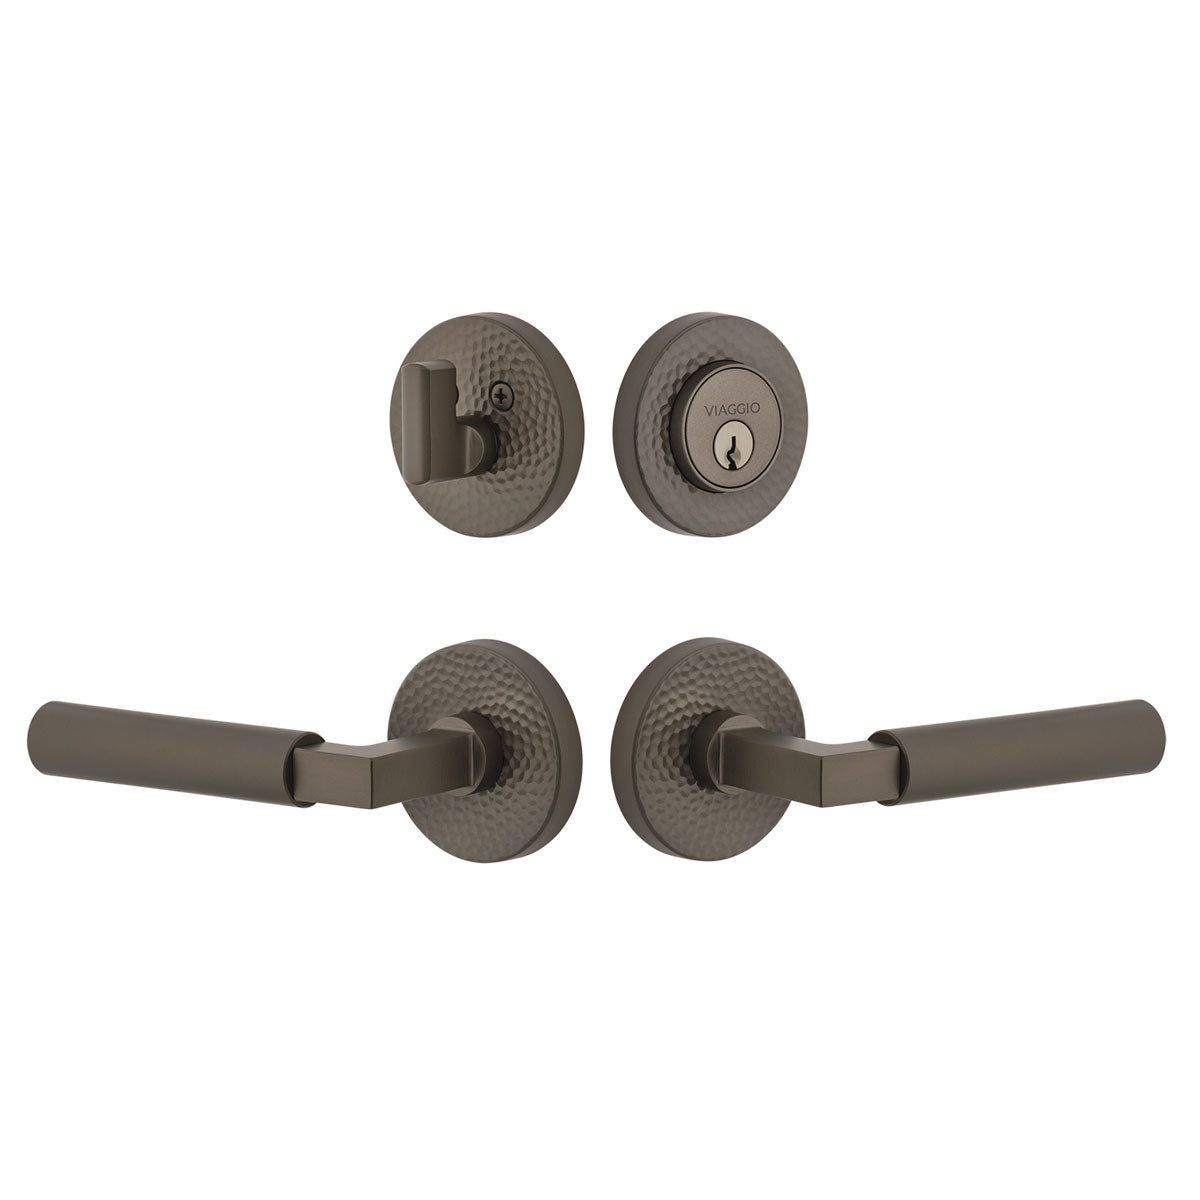 Circolo Hammered Rosette Entry Set with Contempo Lever in Titanium Gray